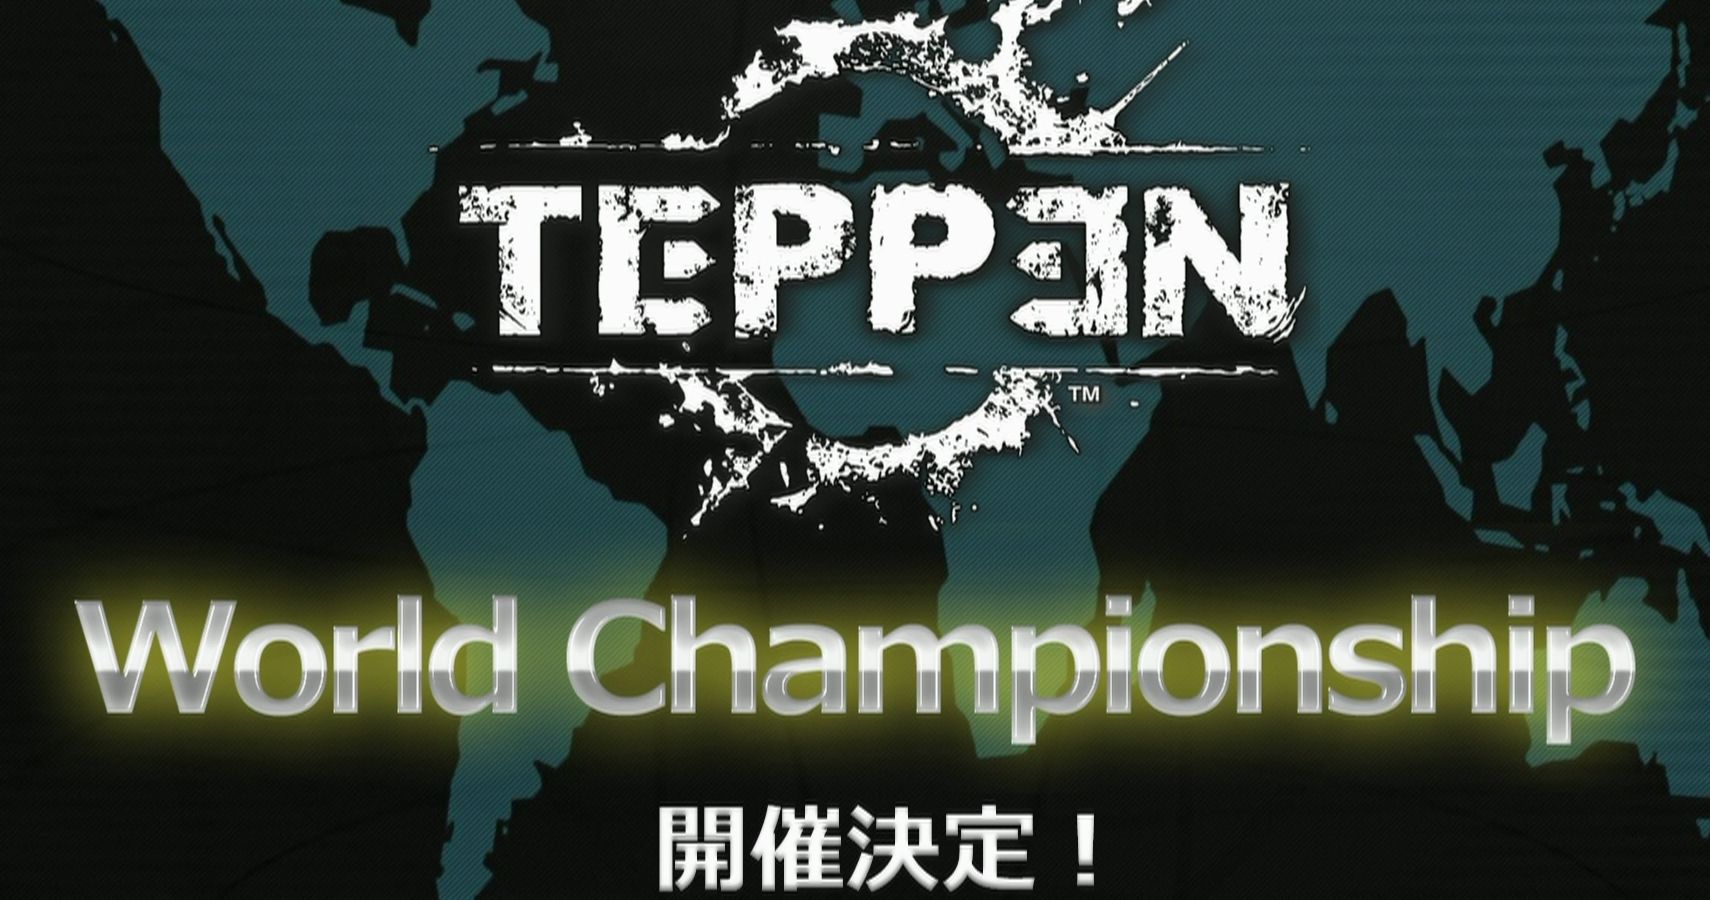 Capcom Is Hosting An AmazonSponsored Teppen Tournament  With $500000 Dollars At Stake